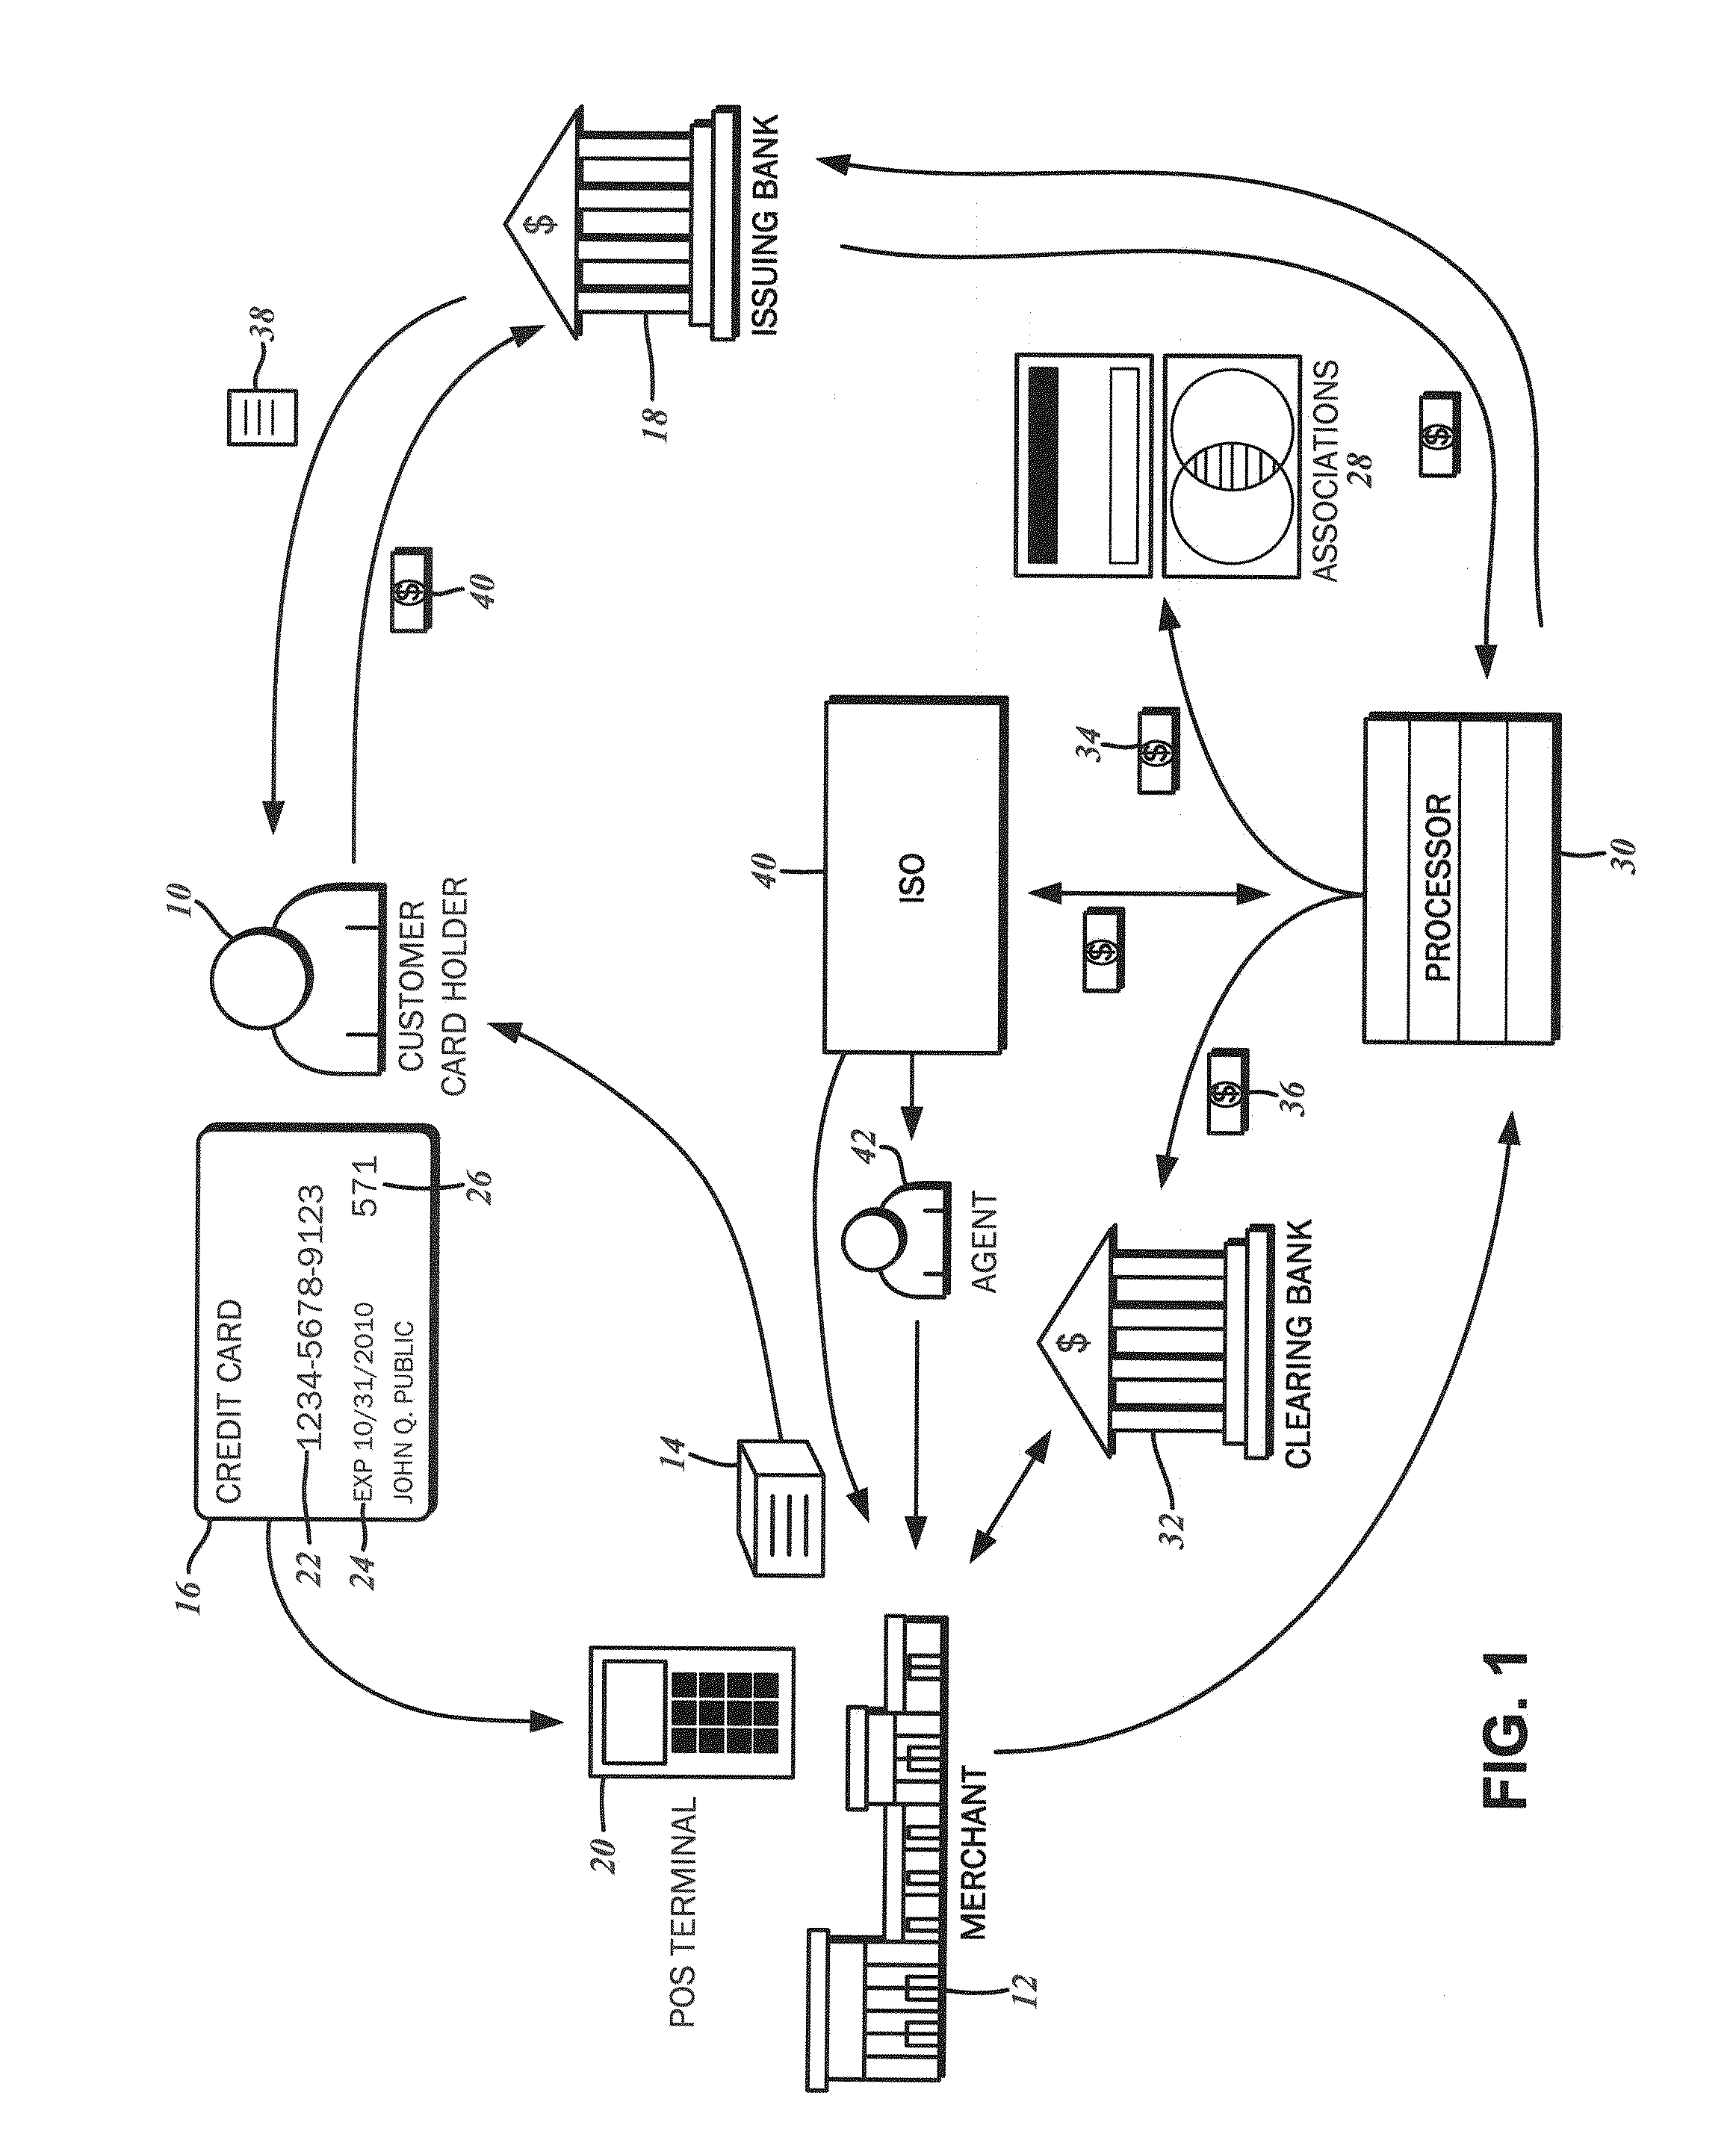 Subscription and membership based credit card processing system